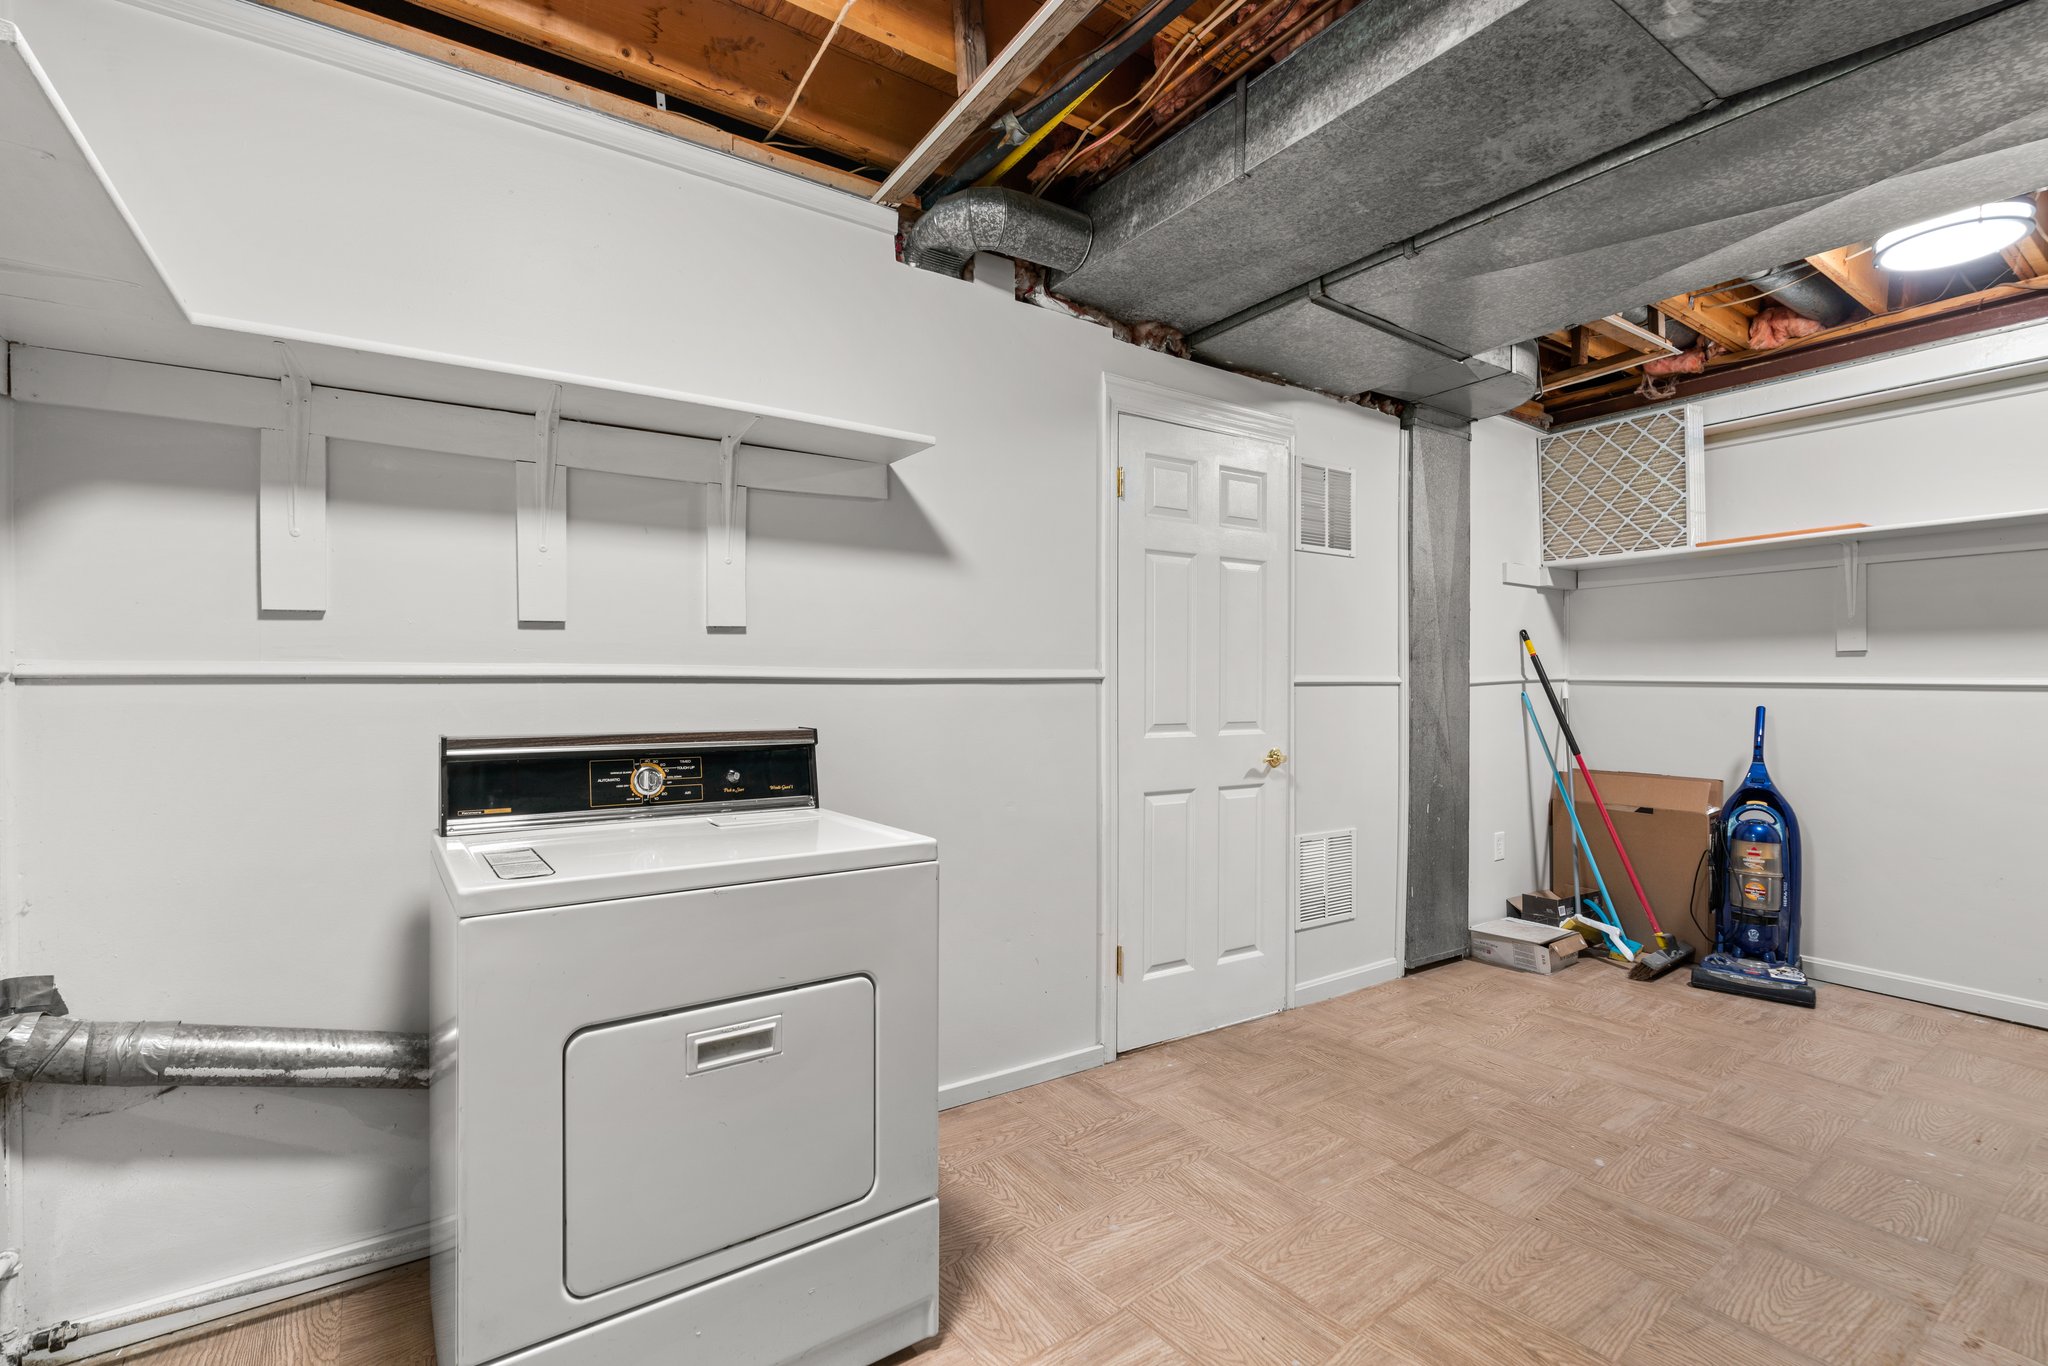 Second Laundry Room